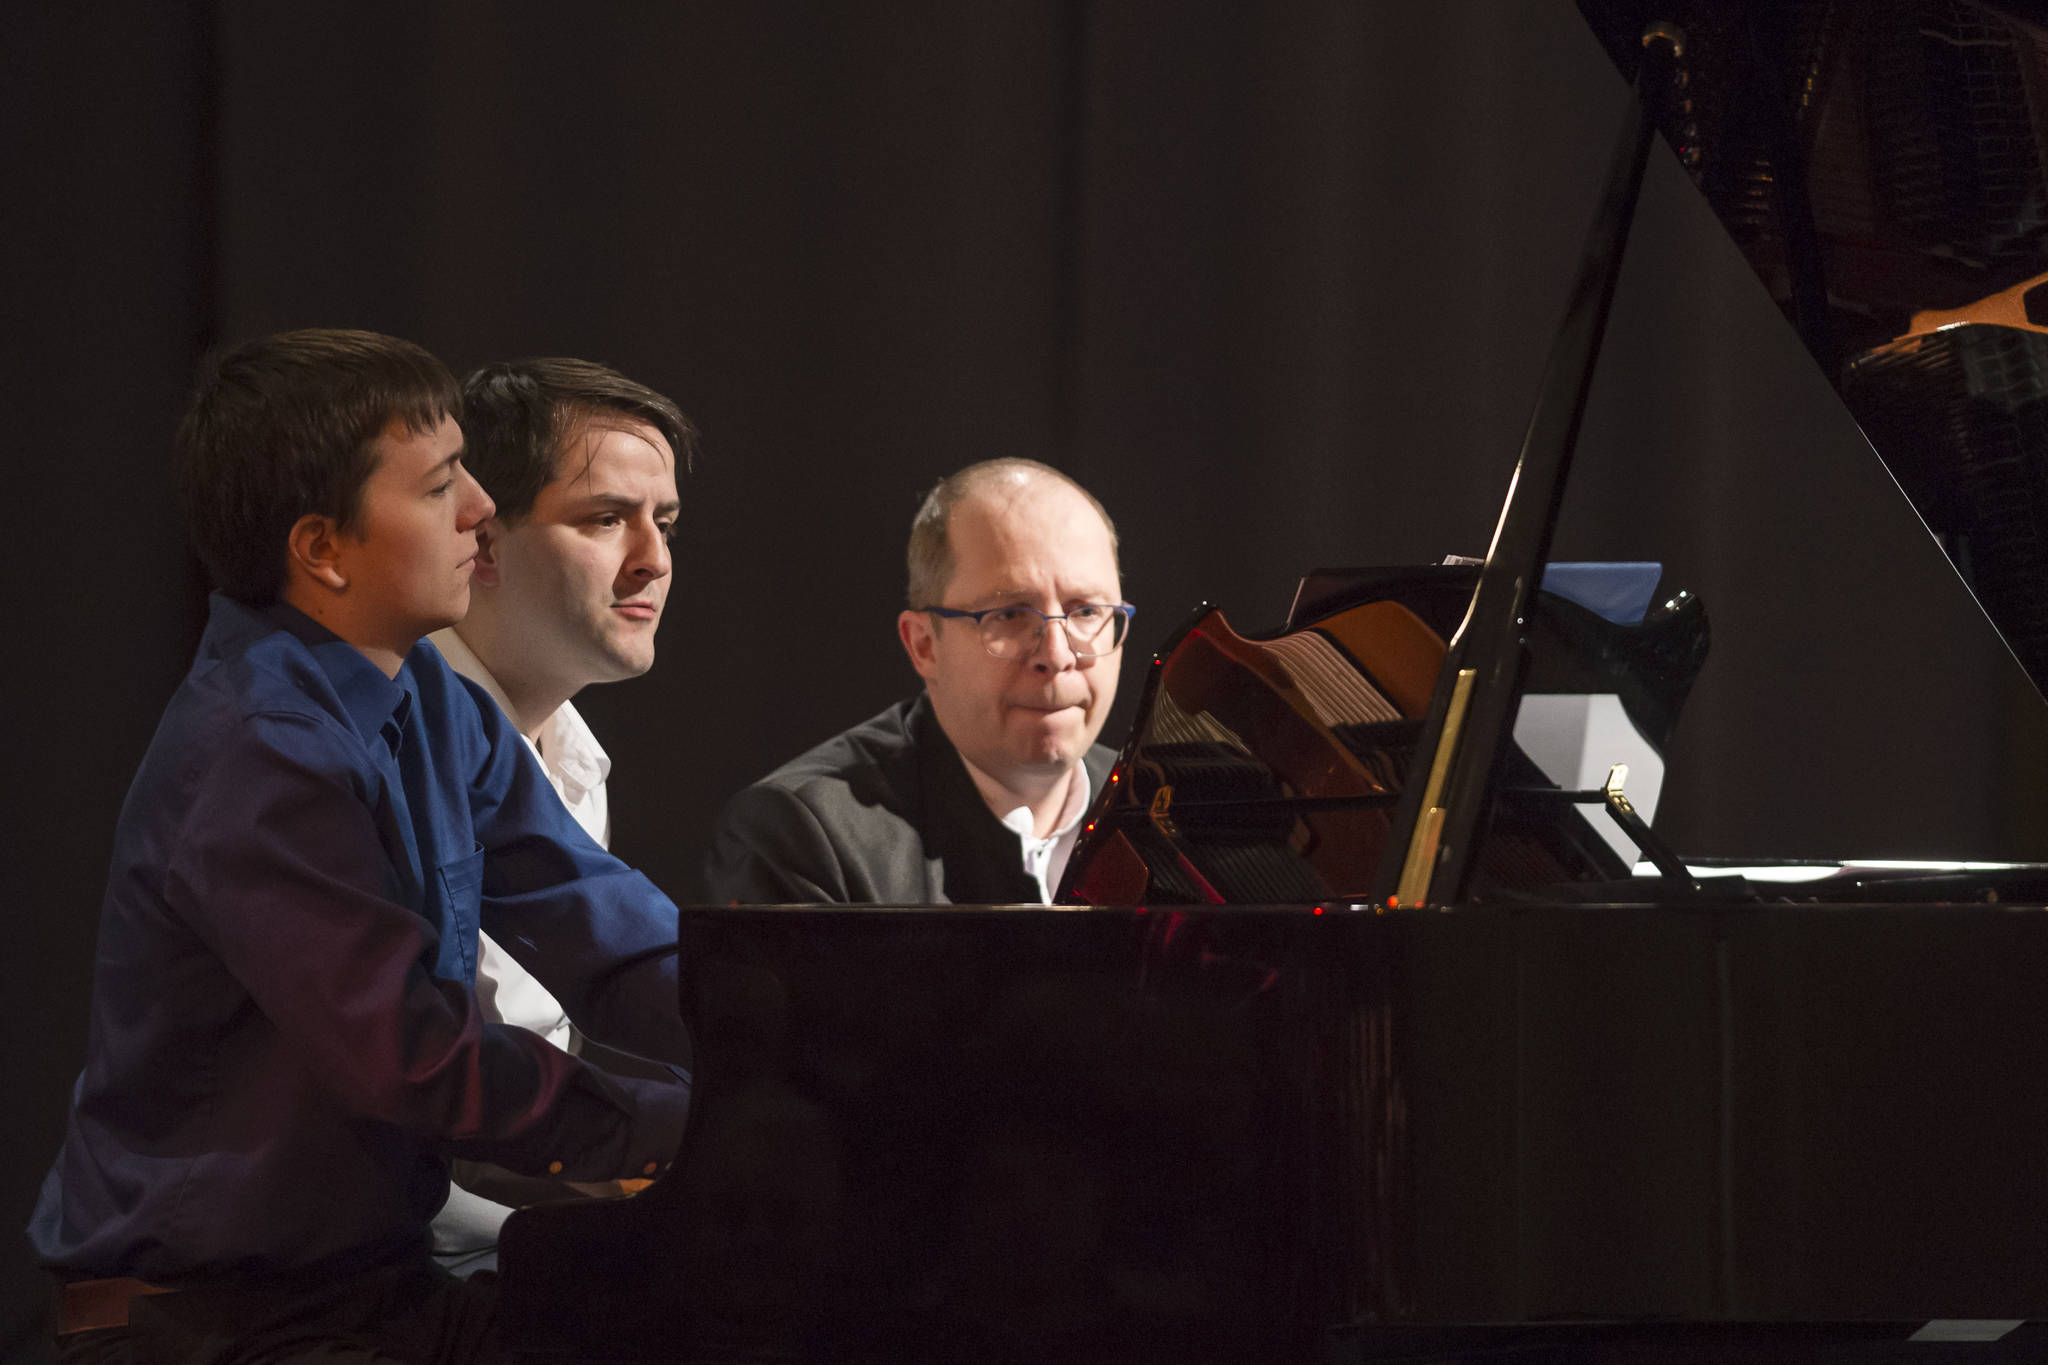 Kyle Farley-Robinson, left, Jon Hays, center, and Dr. Alexander Tutunov play “Romance And Waltz For Six Hands Piano” by Sergei Rachmaninoff during the Juneau Piano Series featuring Tutunov at the Juneau Arts & Culture Center on Friday, Jan. 18, 2019. (Michael Penn | Juneau Empire)